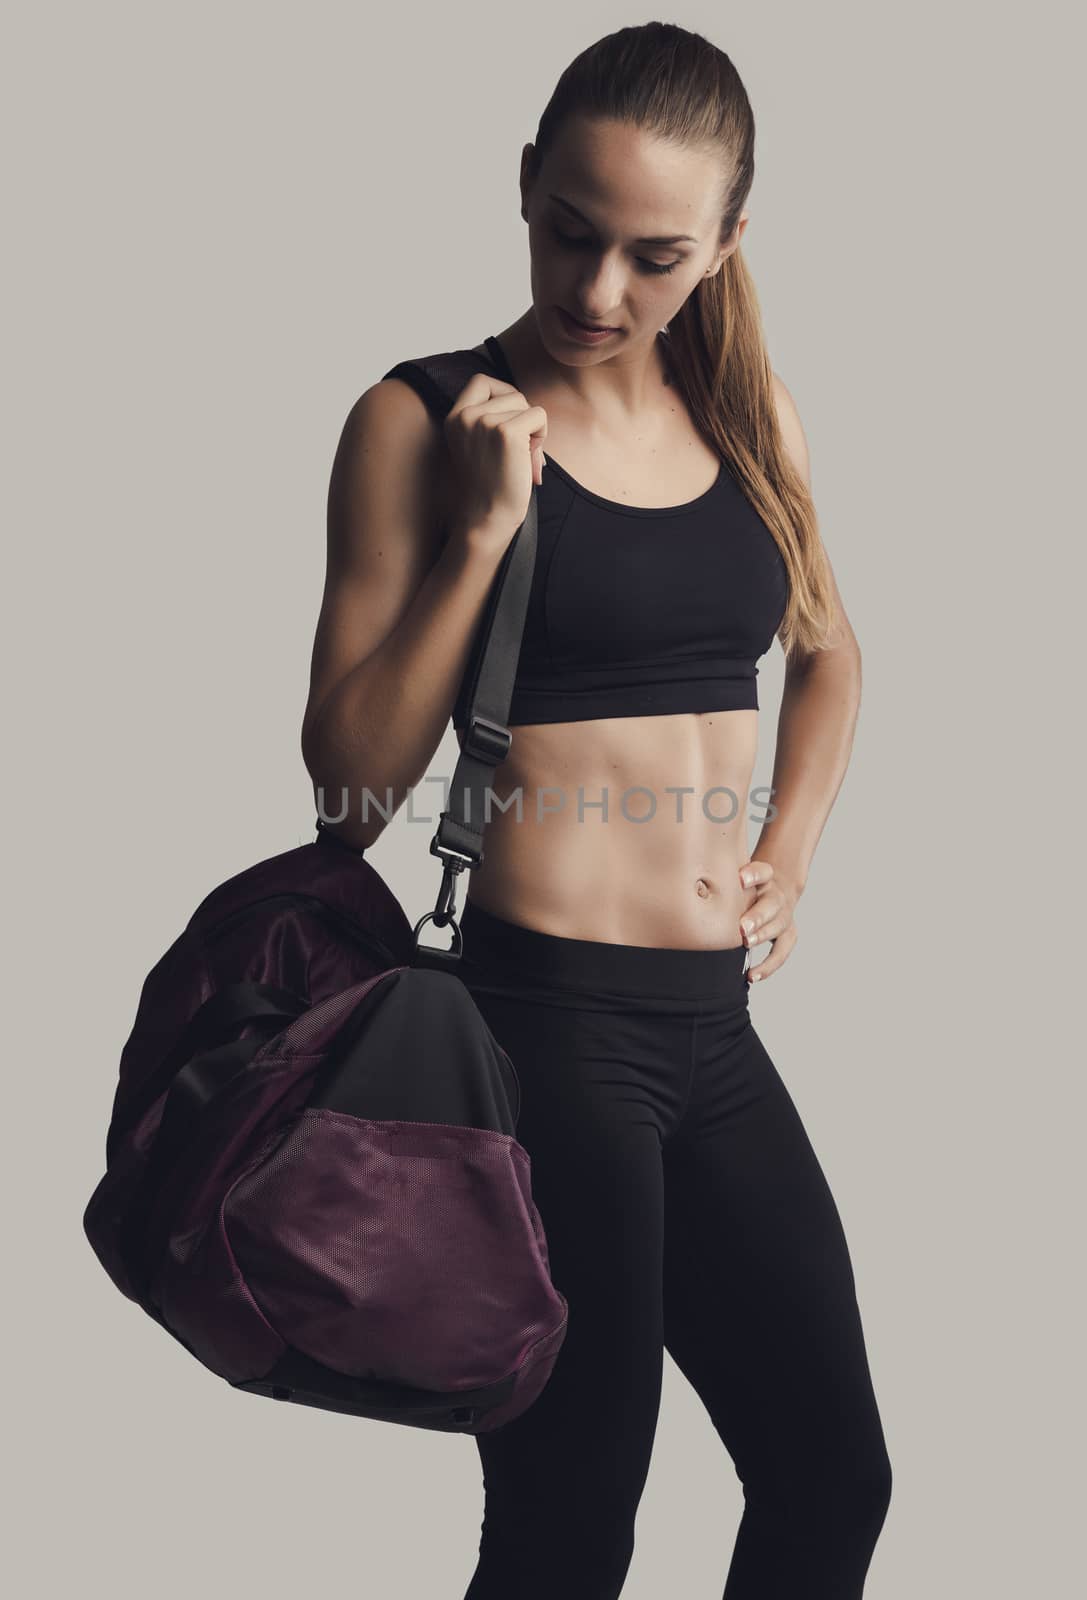 Ready for the gym by Iko